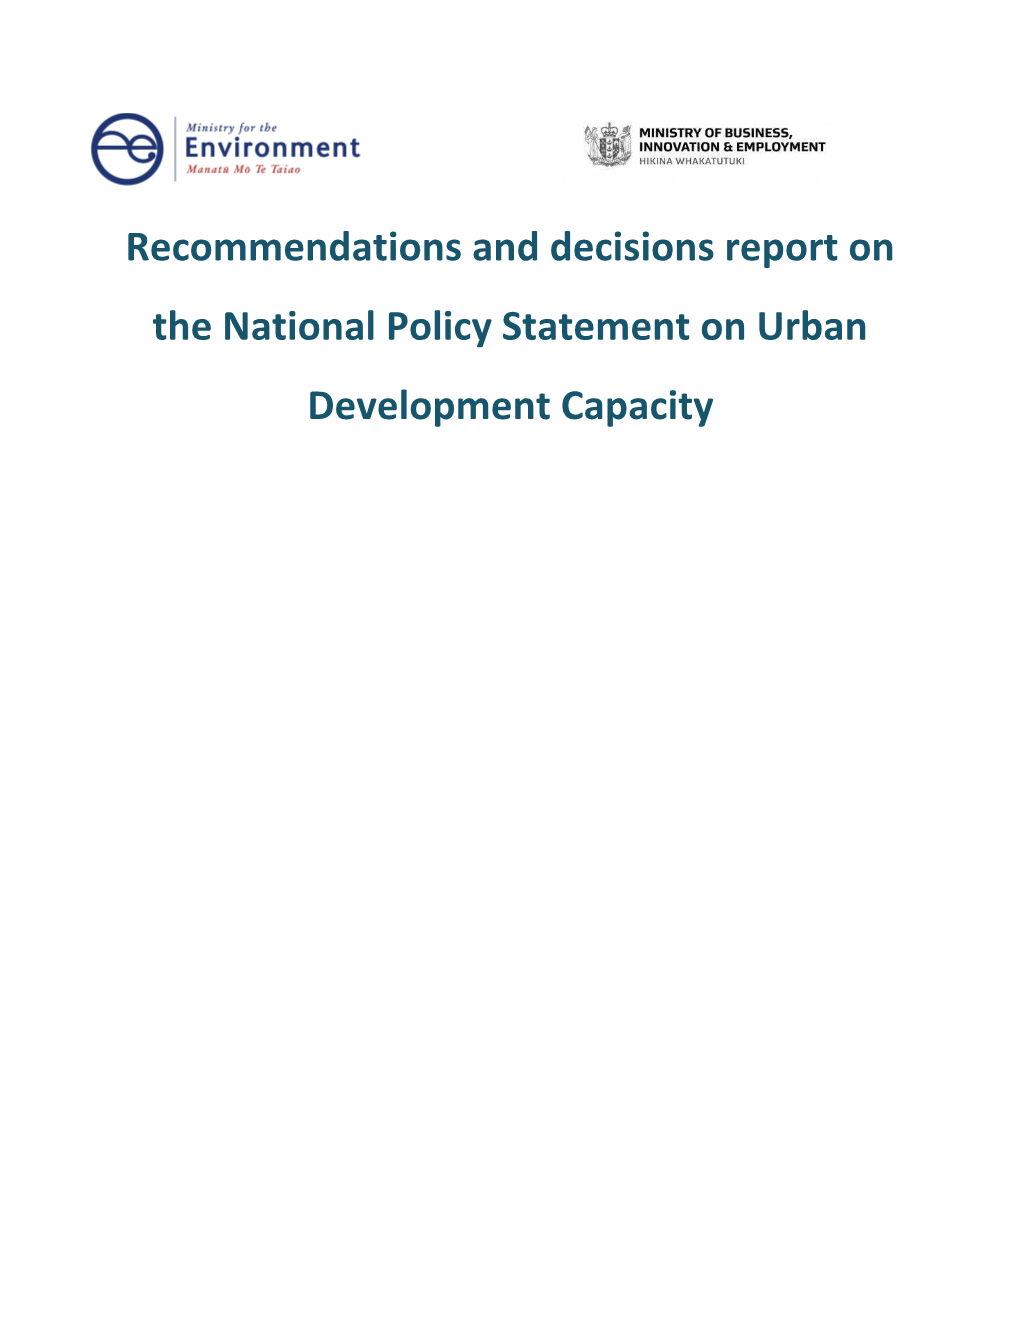 Recommendations and Decisions Report on the National Policy Statement on Urban Development